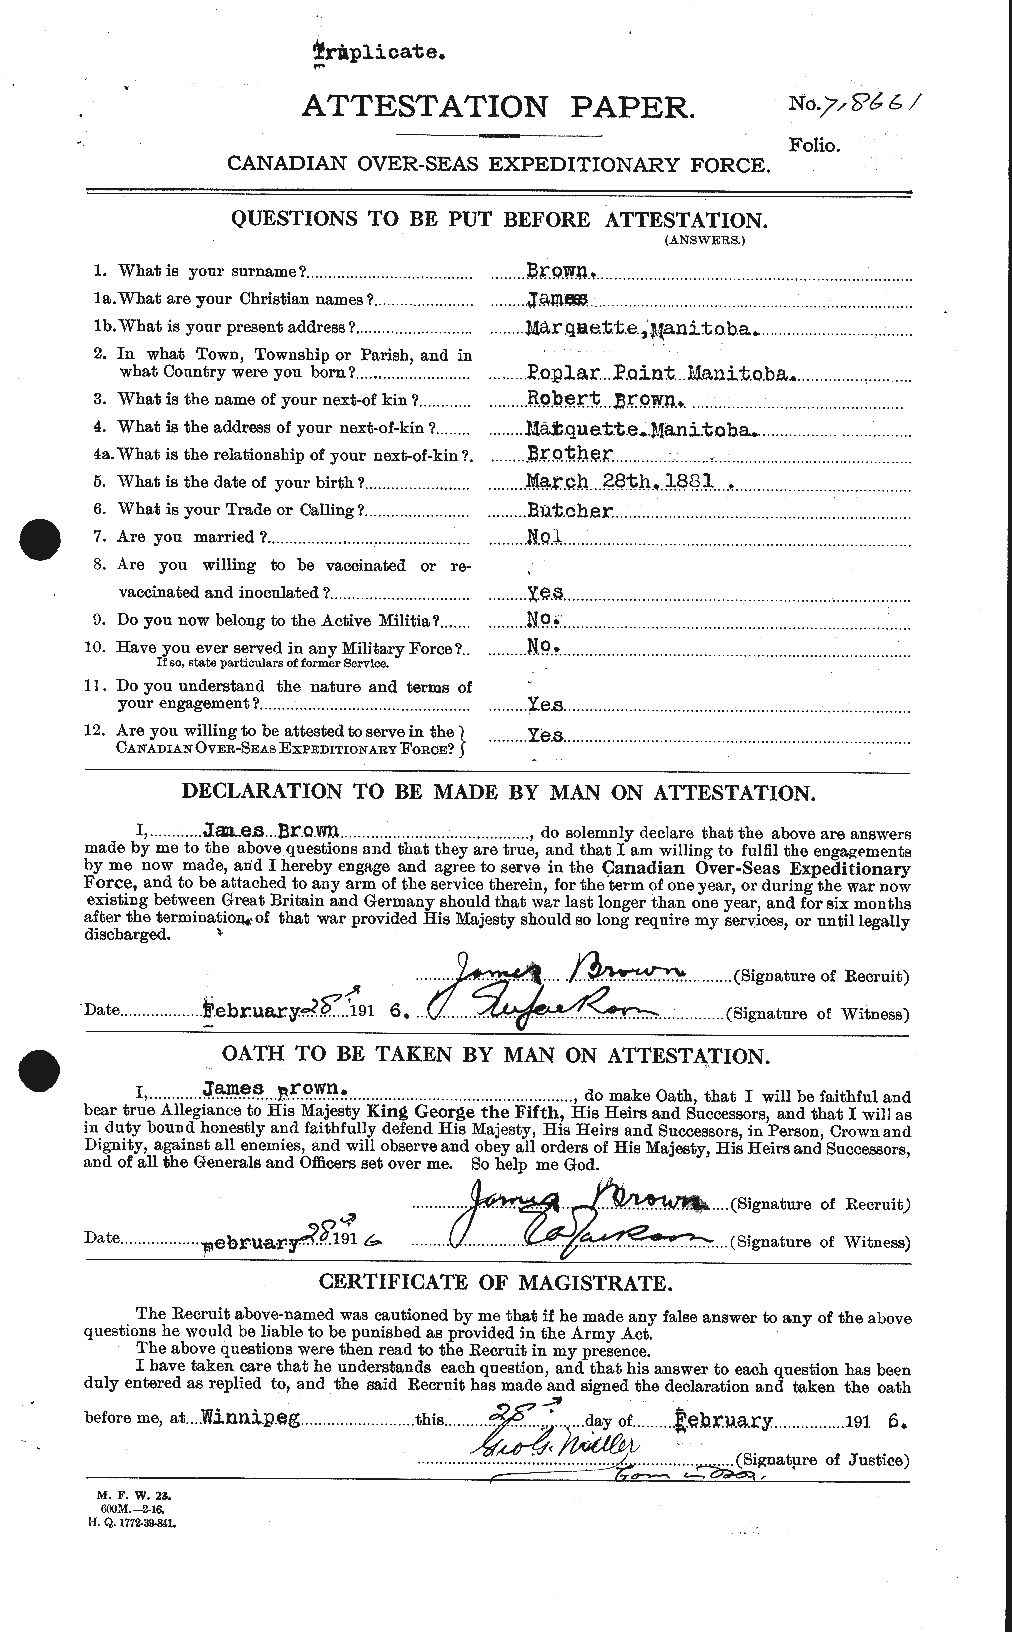 Personnel Records of the First World War - CEF 265745a